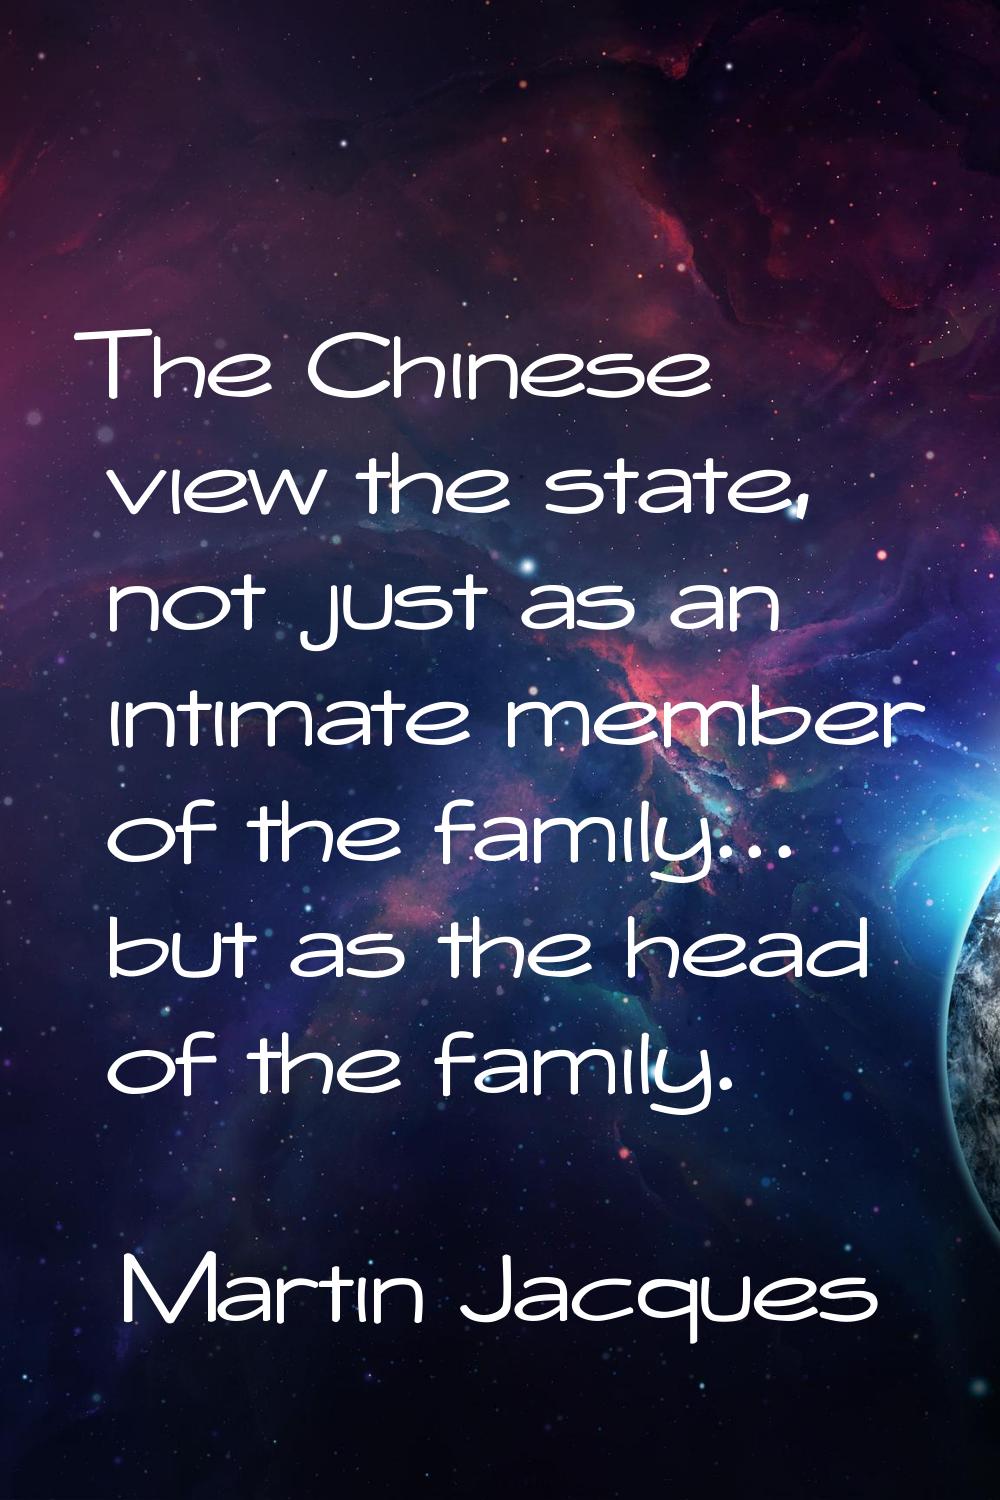 The Chinese view the state, not just as an intimate member of the family... but as the head of the 